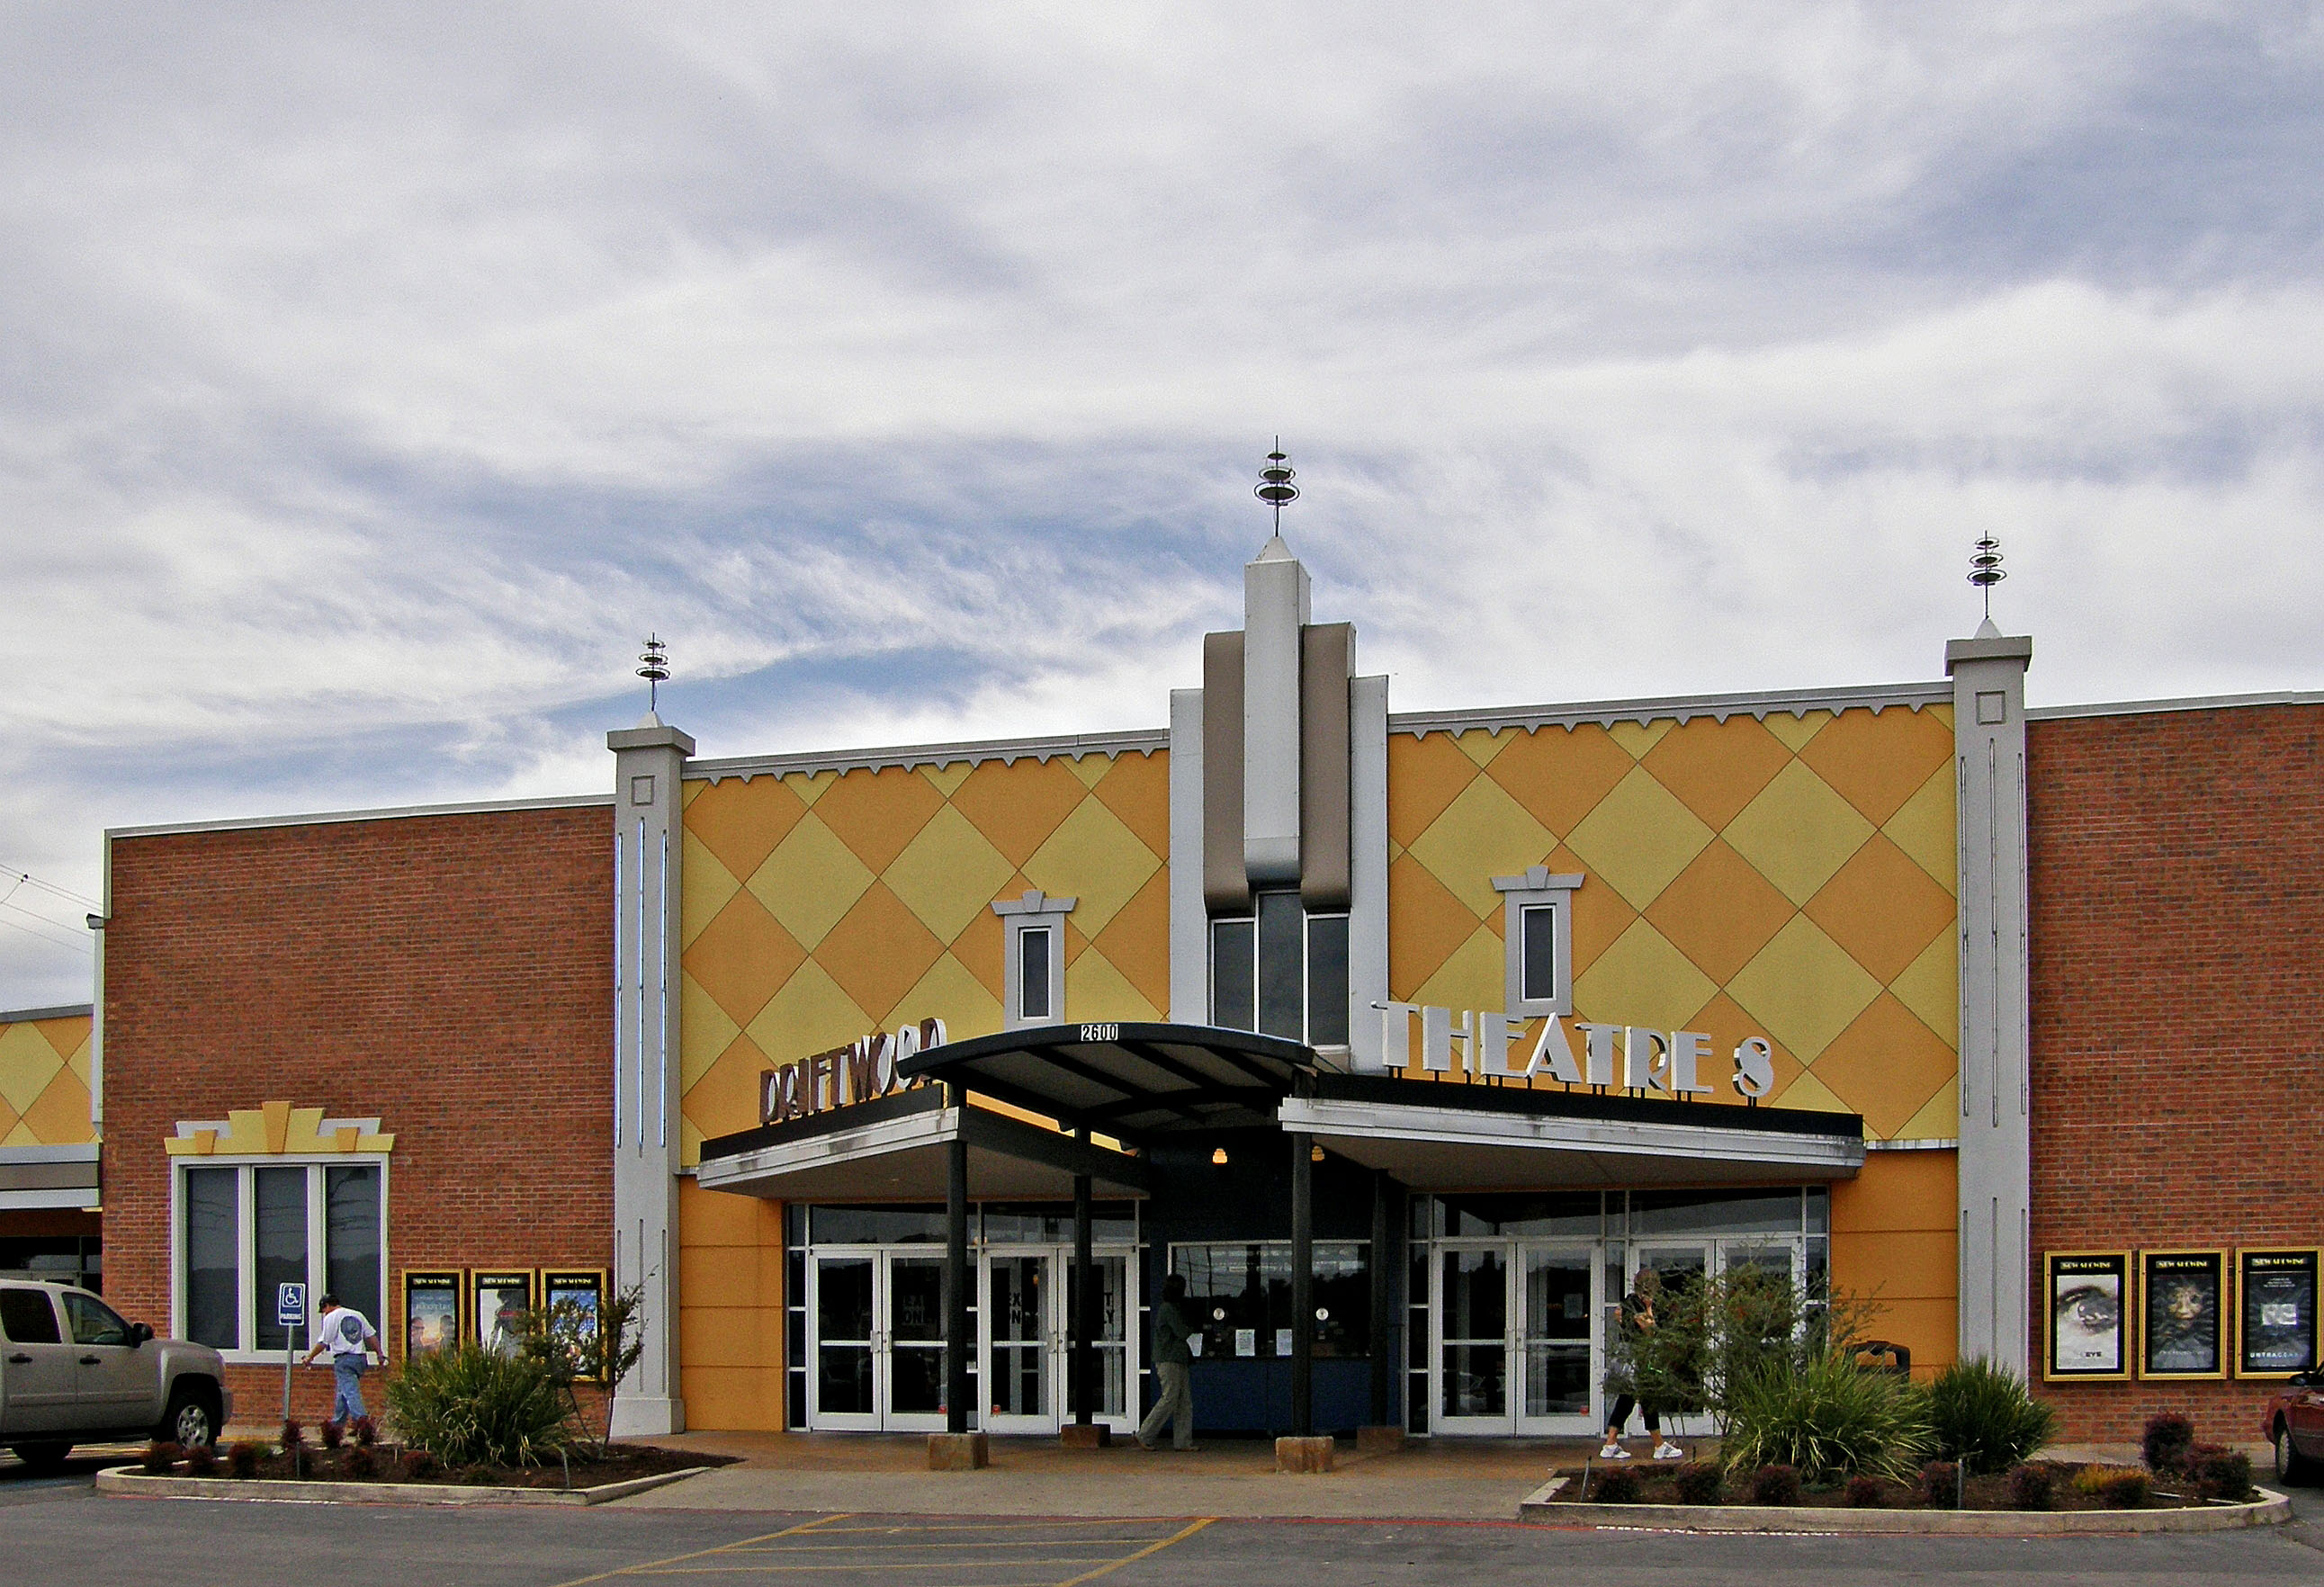 Driftwood Theaters, Marble Falls, TX. Theater is 7 years old. Building is older. Note the Art Deco style.